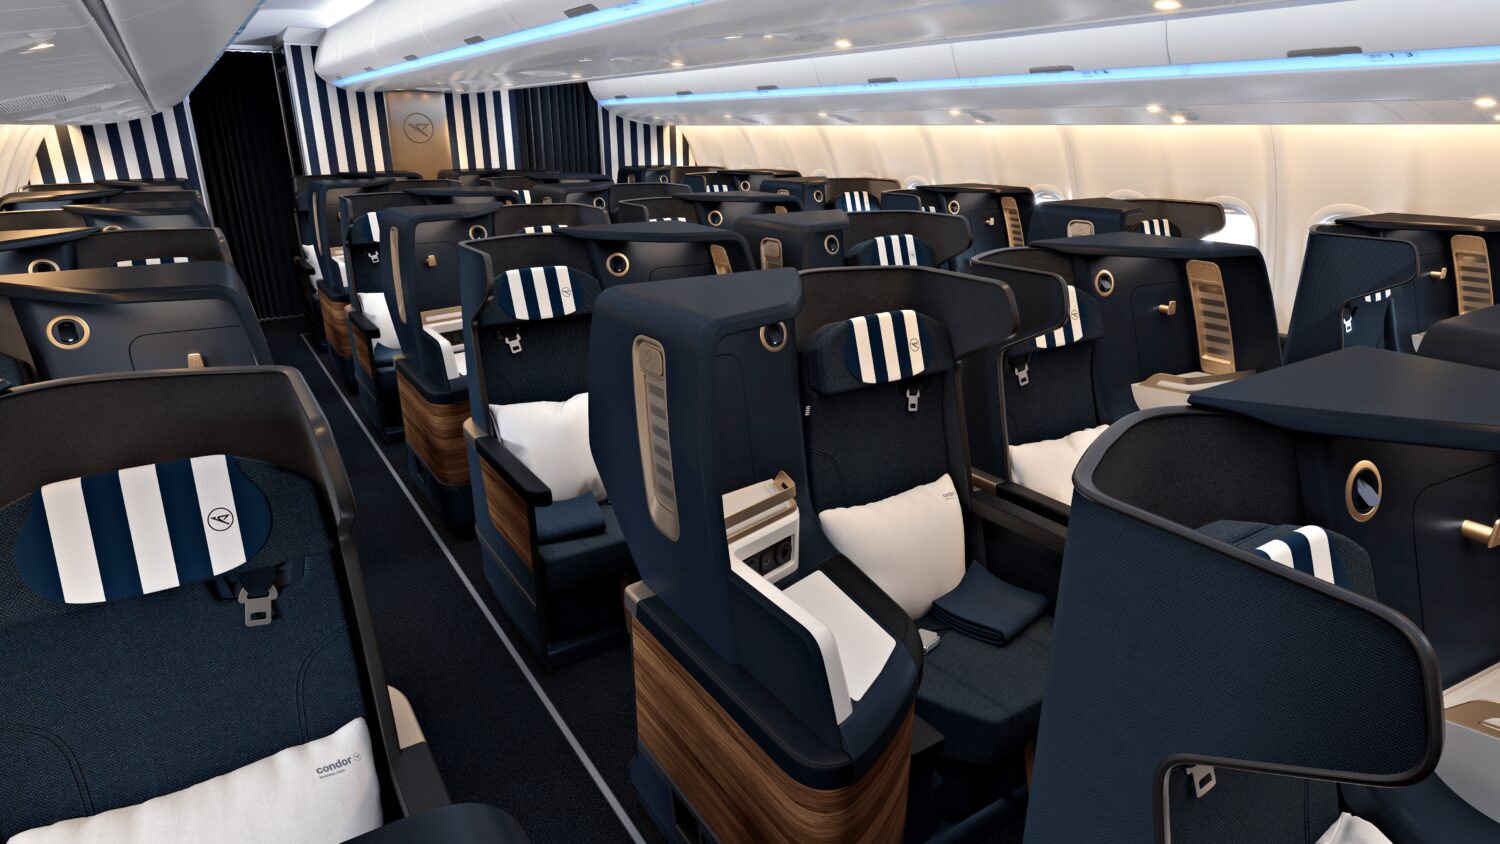 Interior of airplane with blue and white seats.